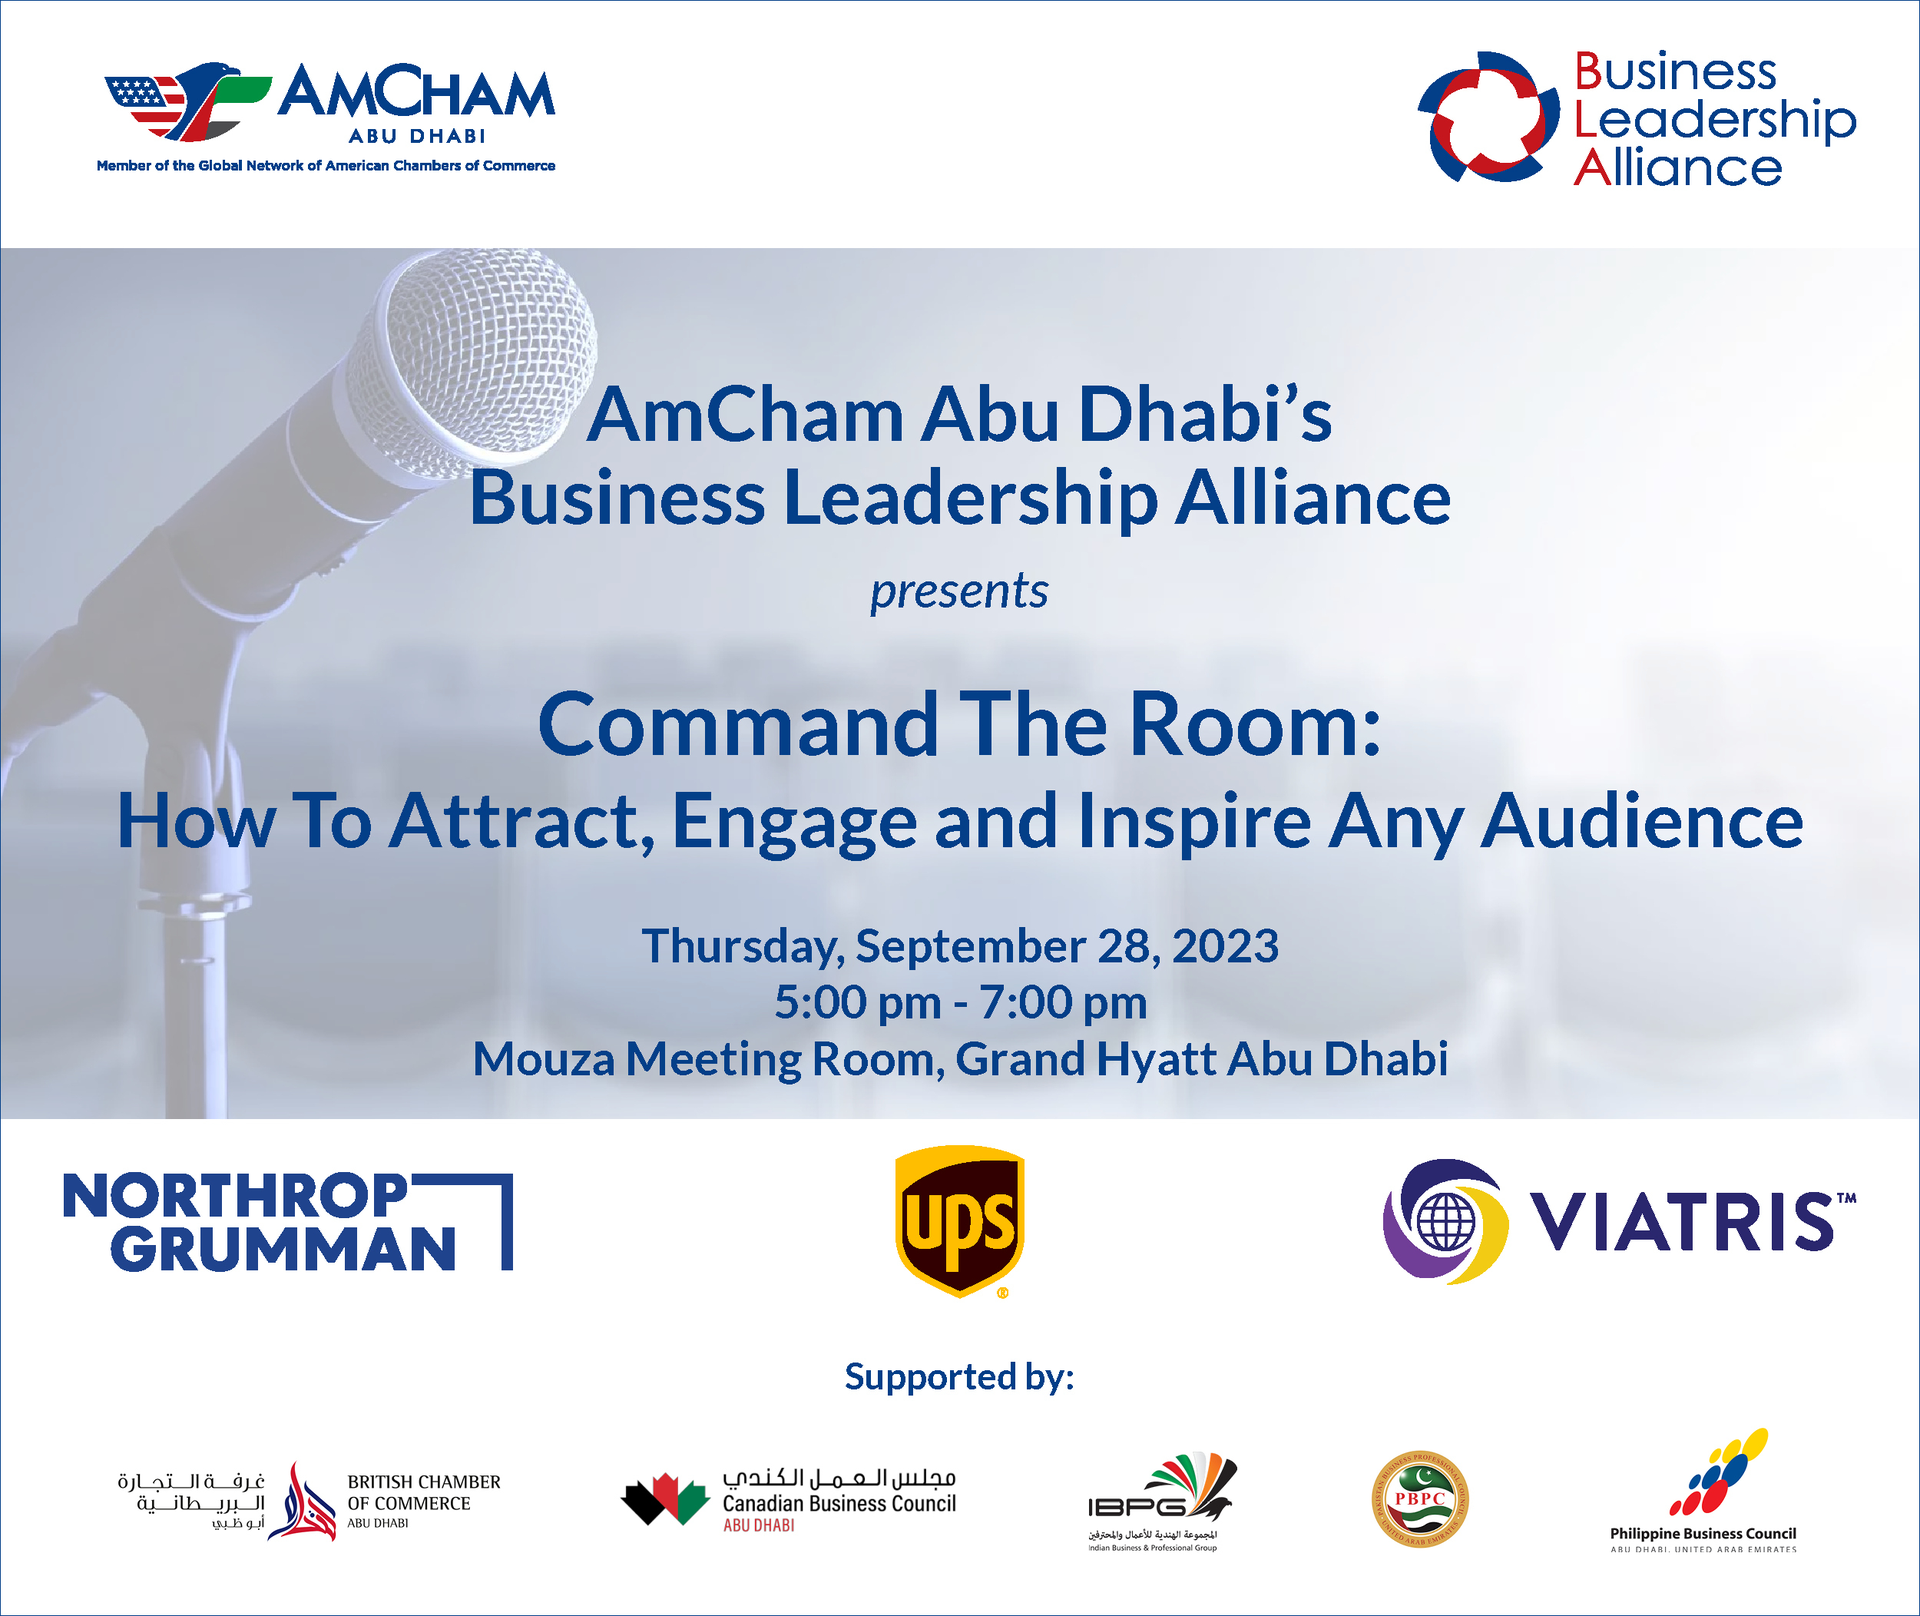 thumbnails Business Leadership Alliance presents "Command The Room: How To Attract, Engage and Inspire Any Audience"